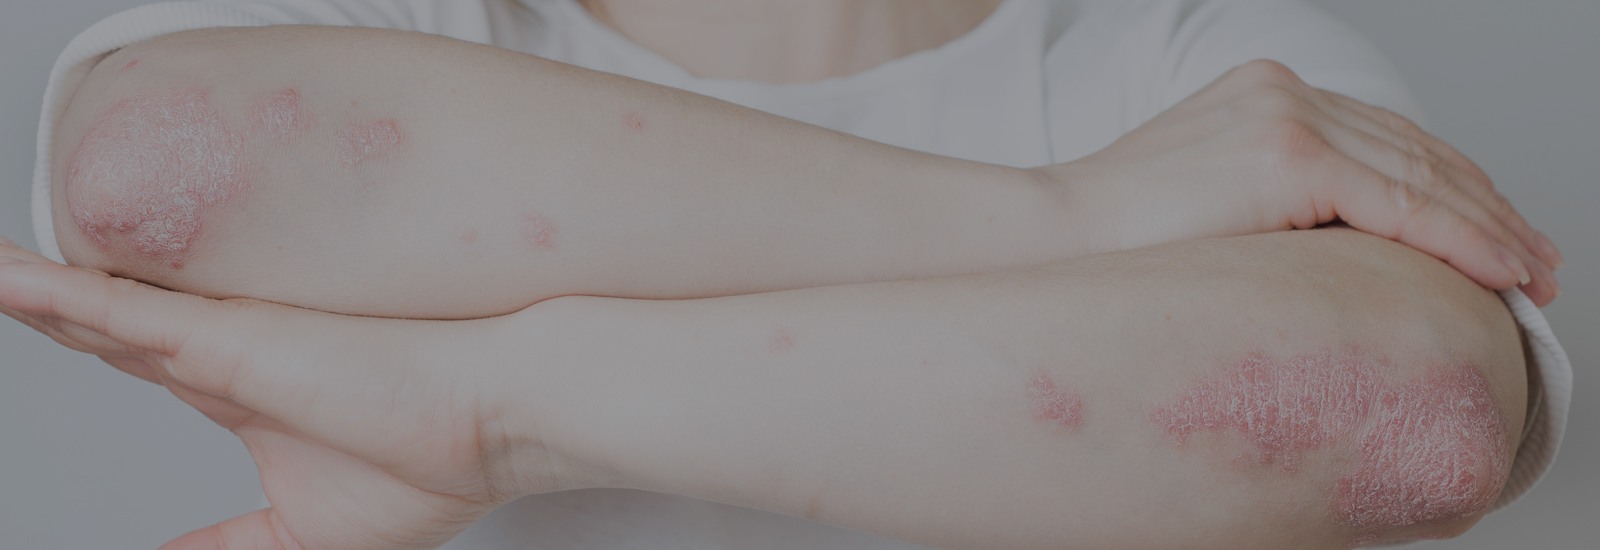 Psoriasis-Things you should know